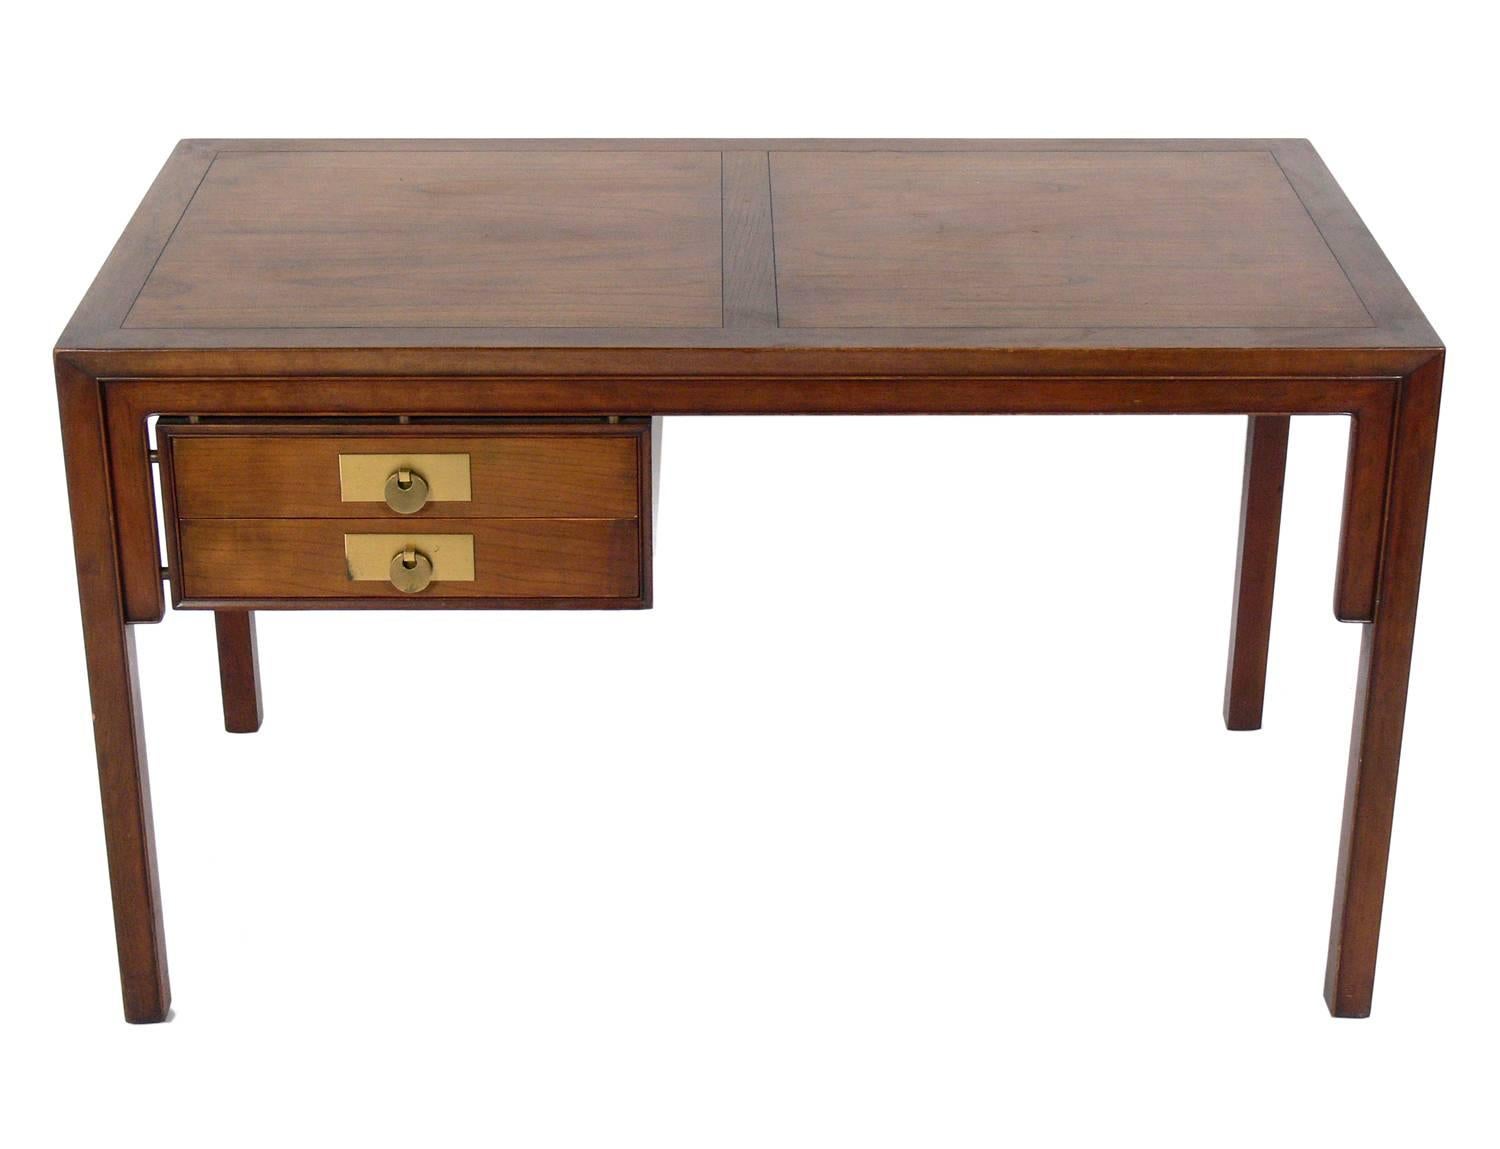 Asian inspired desk by Michael Taylor for Baker, American, circa 1960s. This piece is currently being refinished and can be completed in your choice of color. The price noted below includes refinishing.